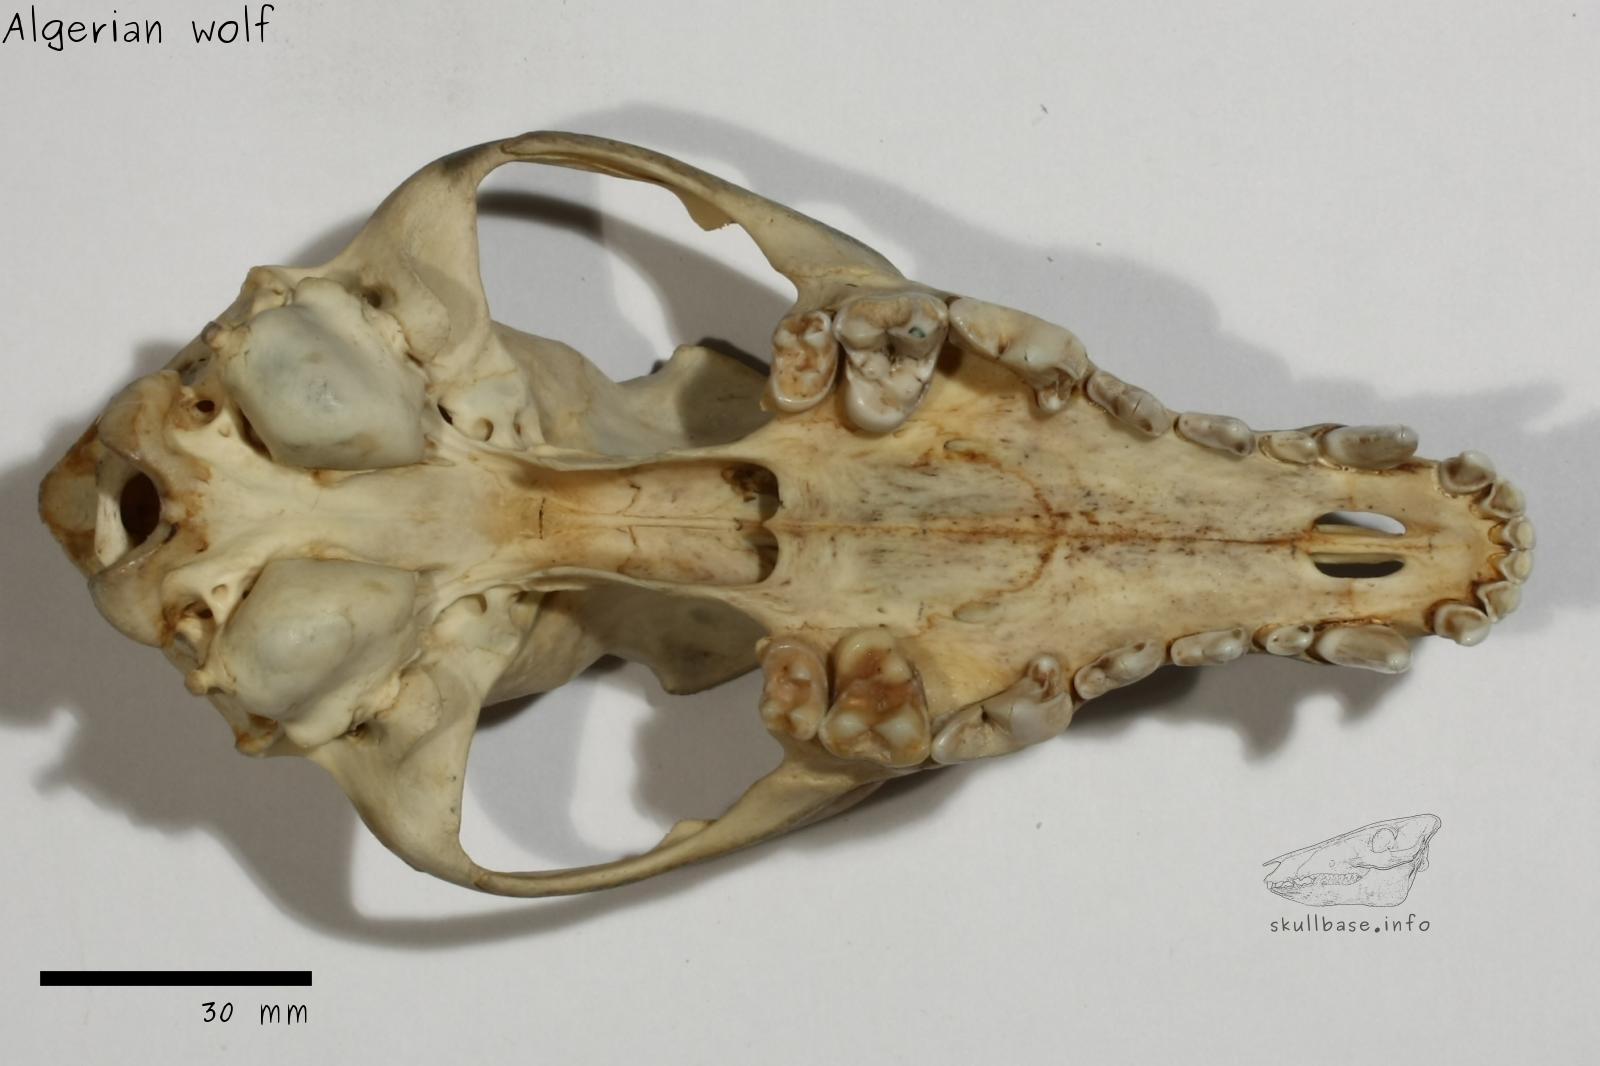 Algerian wolf (Canis anthus algirensis) skull ventral view